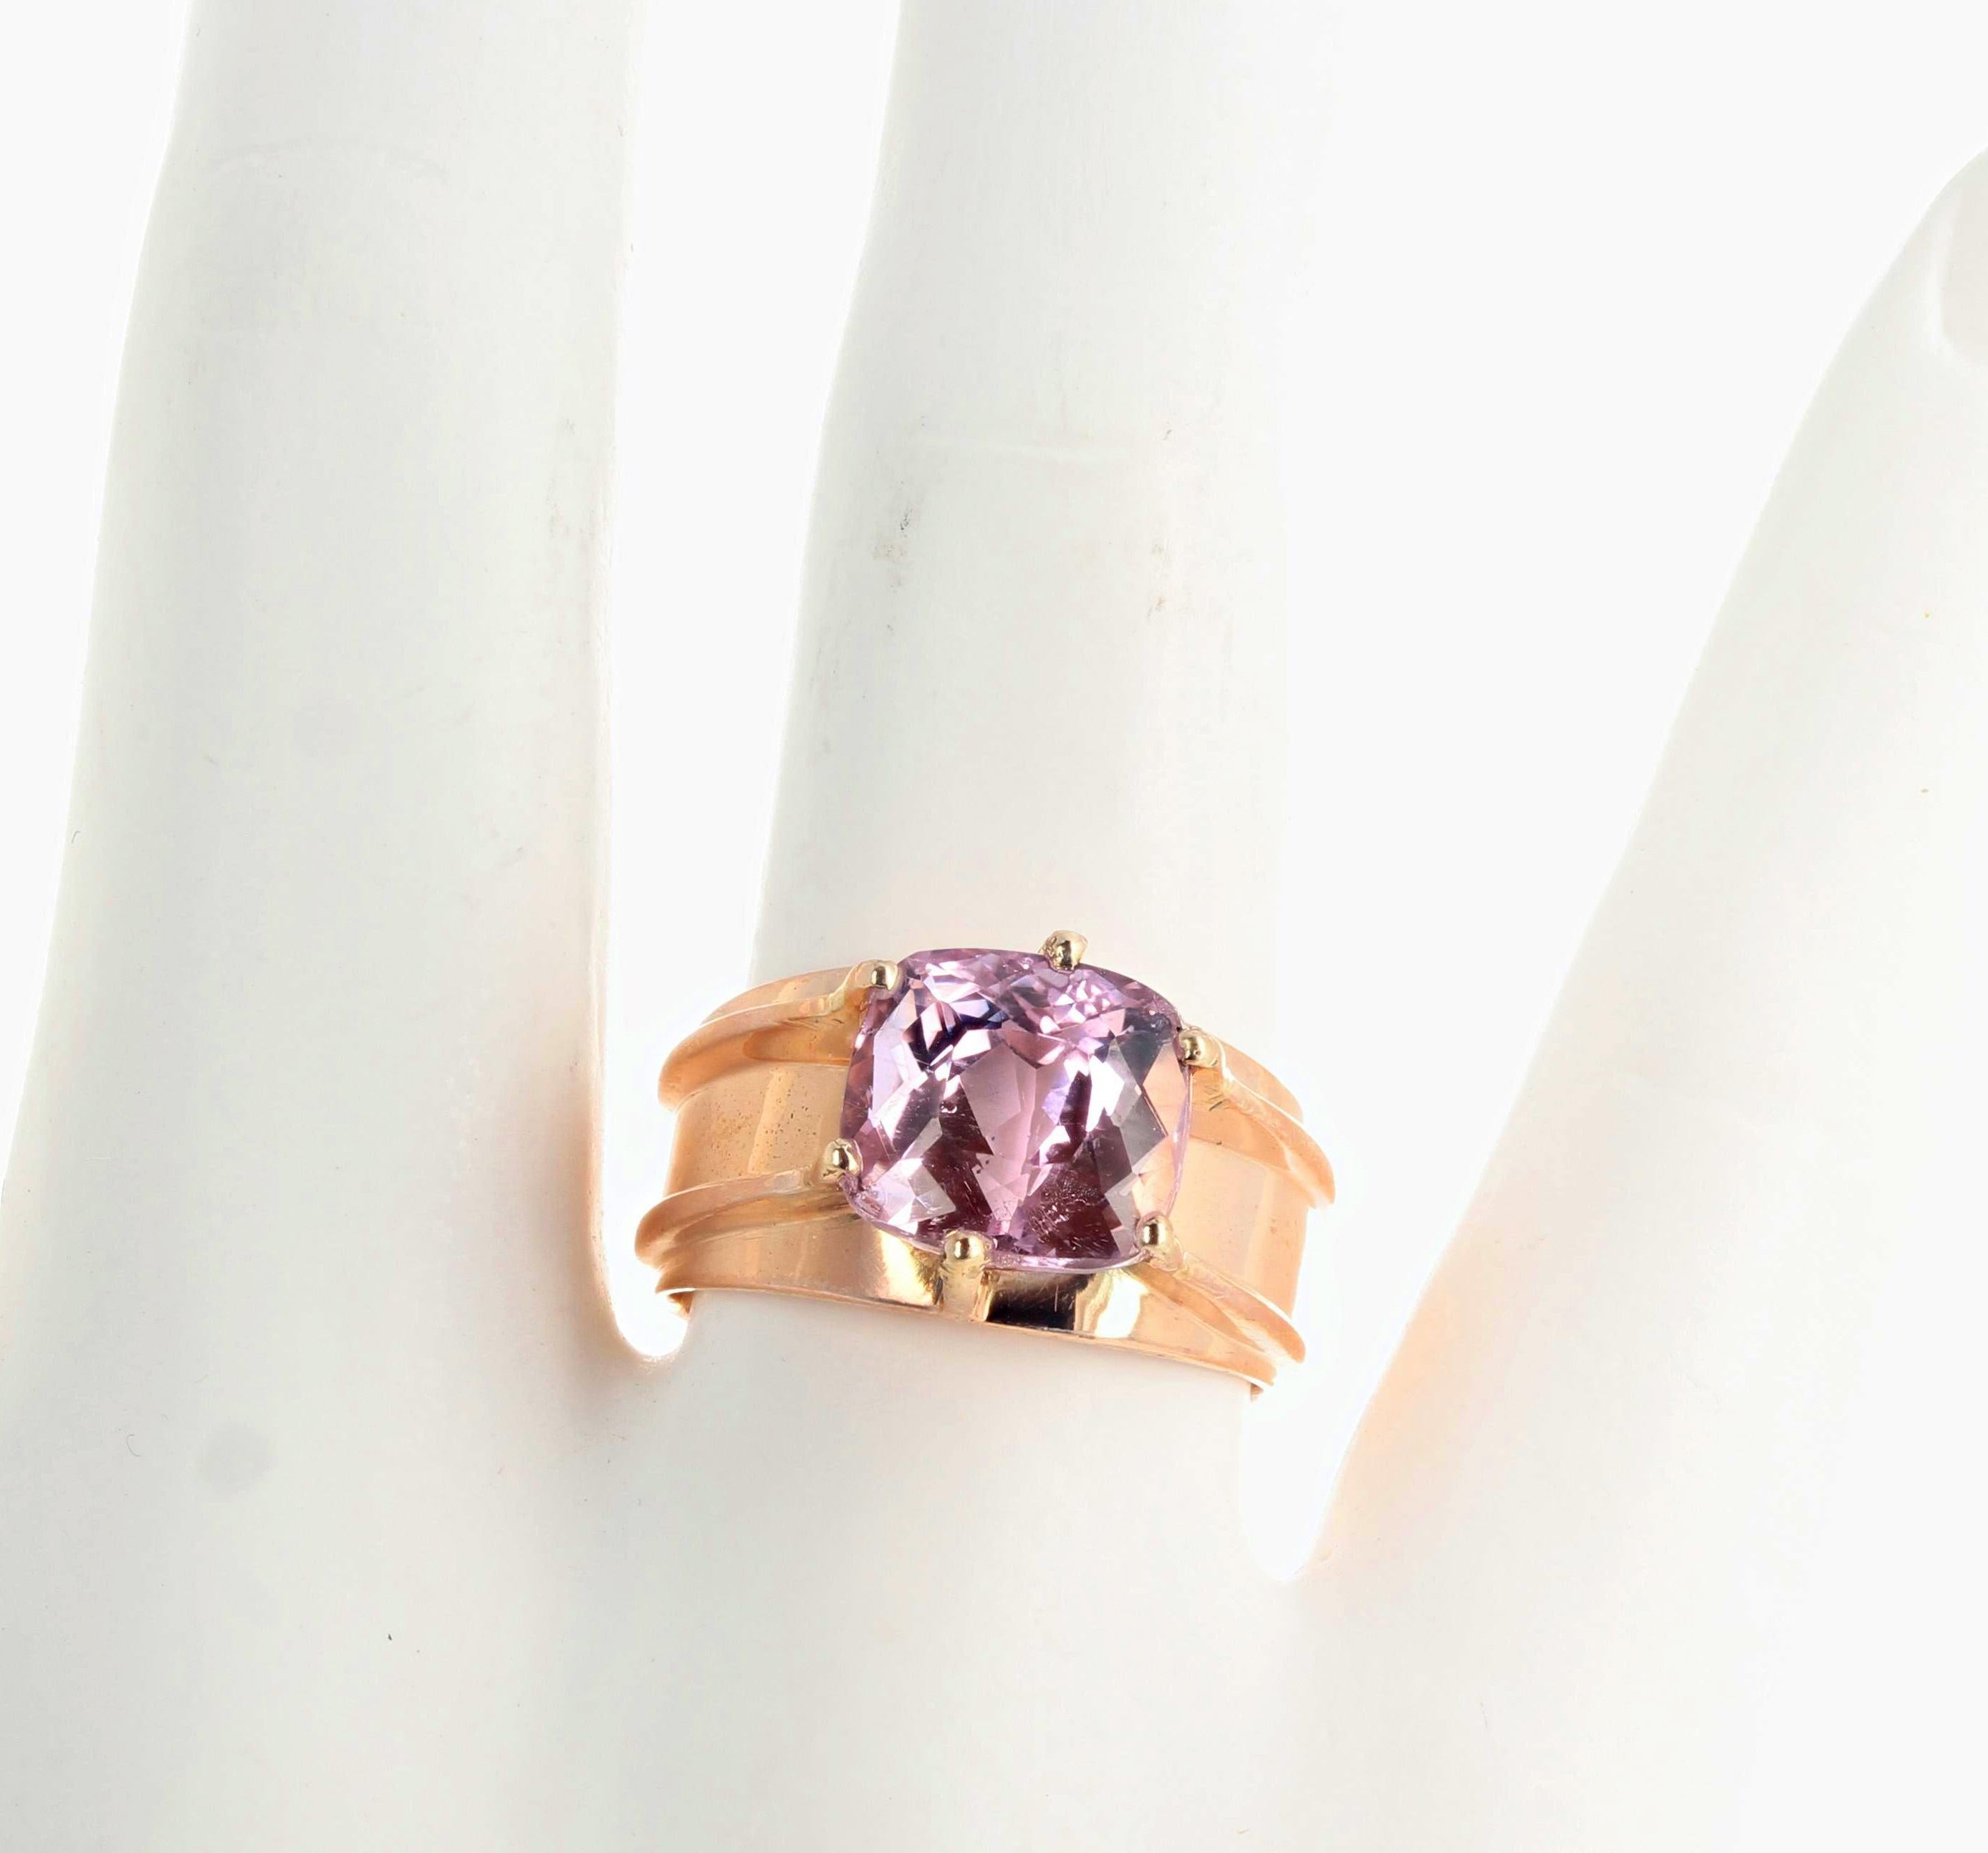 Cushion Cut AJD Fascinating Elegant 5.91 Ct Clear Kunzite Pink Gold Day to Evening Ring